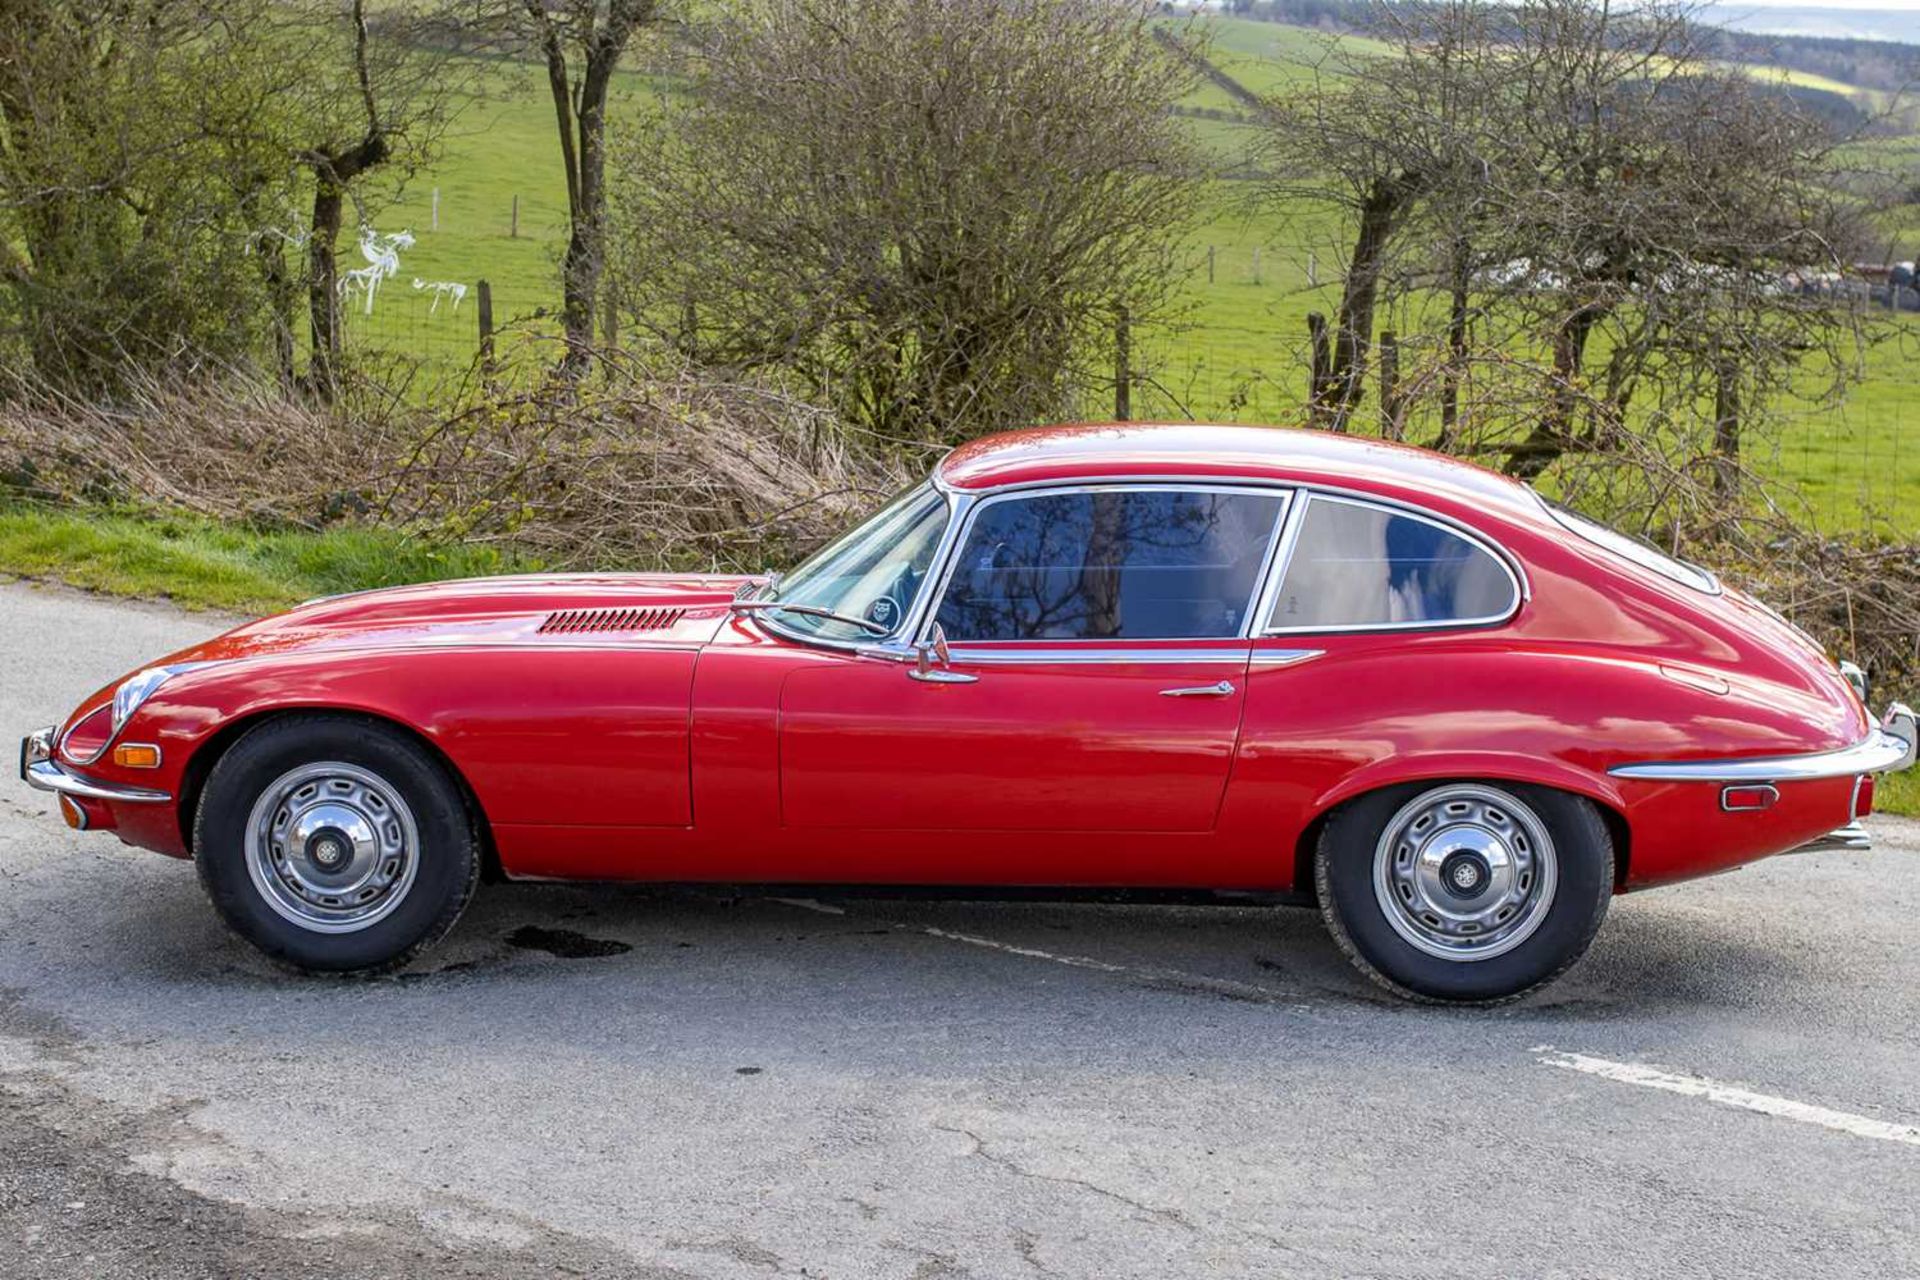 1973 Jaguar E-Type Coupe 5.3 V12 Three owners from new - Image 13 of 79